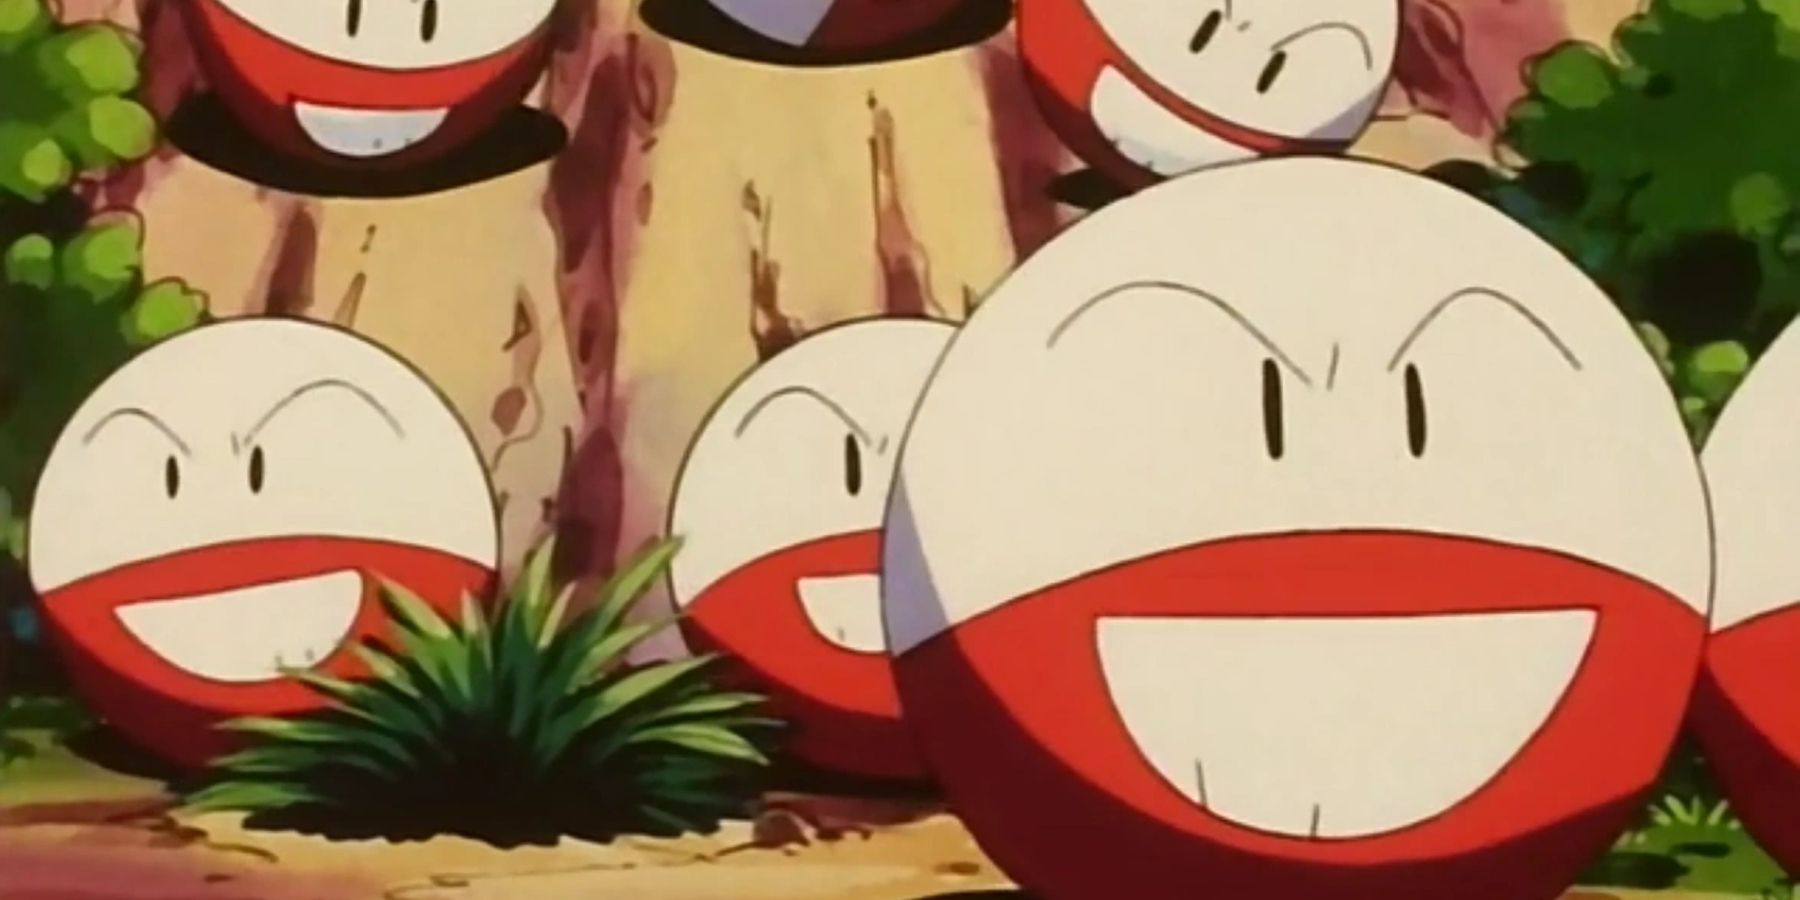 Hiusian Voltorb, Electrode, Pokeball Pattern - PDF - SeiferNoir's Ko-fi  Shop - Ko-fi ❤️ Where creators get support from fans through donations,  memberships, shop sales and more! The original 'Buy Me a